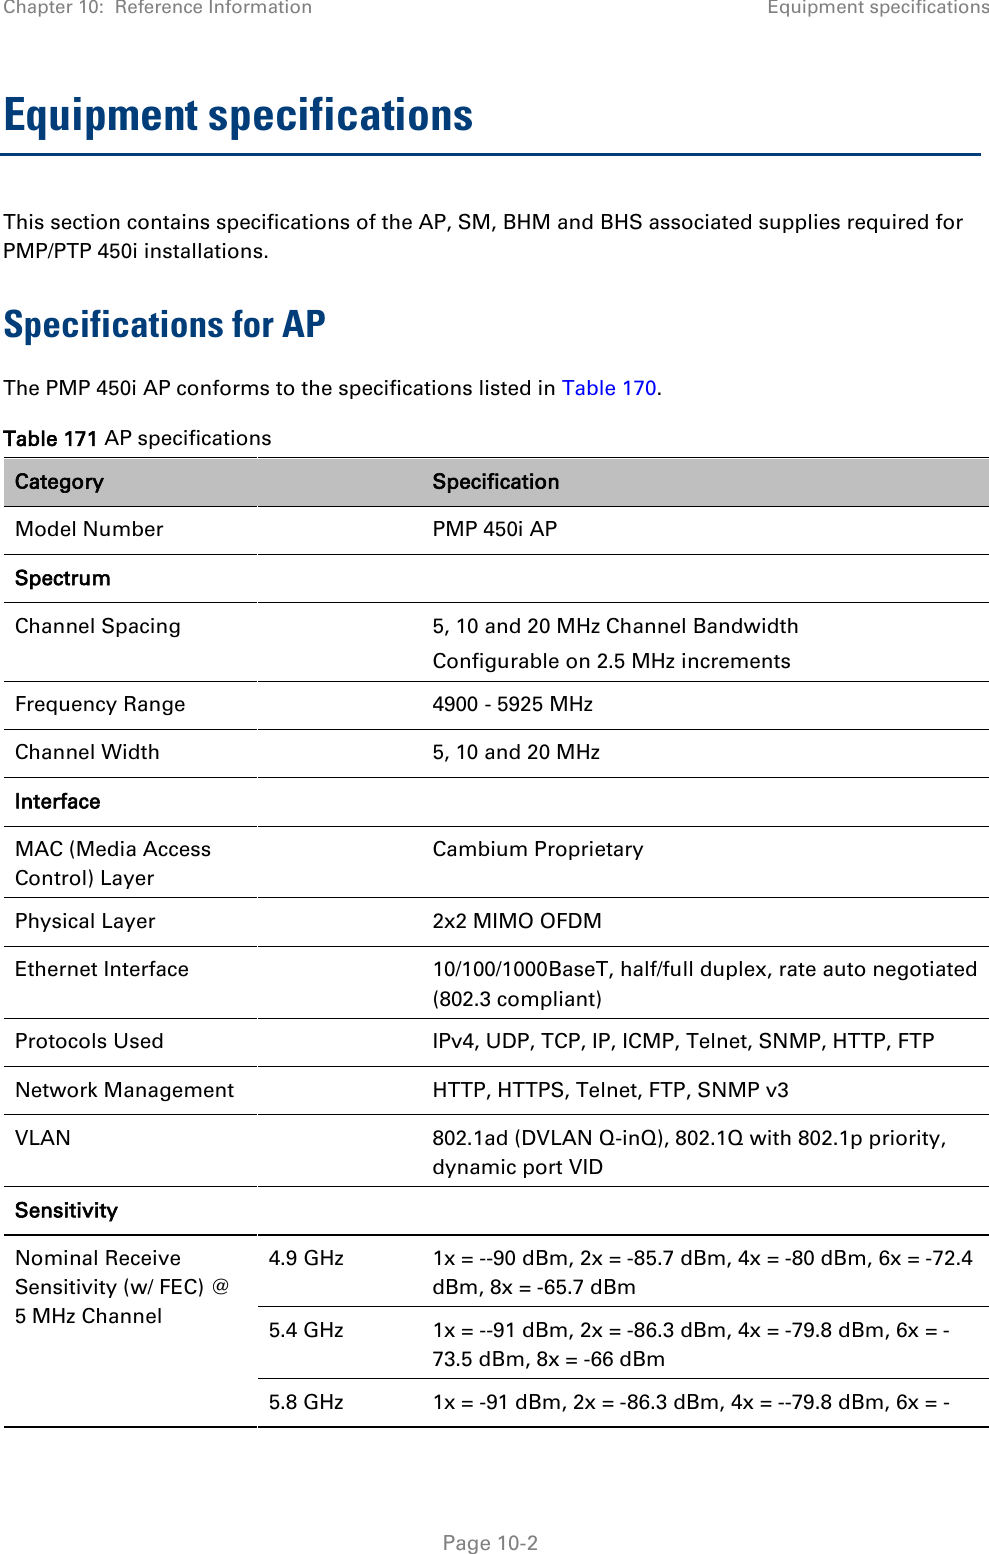 Chapter 10:  Reference Information Equipment specifications   Page 10-2 Equipment specifications This section contains specifications of the AP, SM, BHM and BHS associated supplies required for PMP/PTP 450i installations. Specifications for AP The PMP 450i AP conforms to the specifications listed in Table 170. Table 171 AP specifications Category  Specification Model Number    PMP 450i AP Spectrum    Channel Spacing    5, 10 and 20 MHz Channel Bandwidth Configurable on 2.5 MHz increments Frequency Range    4900 - 5925 MHz Channel Width    5, 10 and 20 MHz Interface    MAC (Media Access Control) Layer  Cambium Proprietary Physical Layer    2x2 MIMO OFDM Ethernet Interface    10/100/1000BaseT, half/full duplex, rate auto negotiated (802.3 compliant) Protocols Used    IPv4, UDP, TCP, IP, ICMP, Telnet, SNMP, HTTP, FTP Network Management    HTTP, HTTPS, Telnet, FTP, SNMP v3 VLAN    802.1ad (DVLAN Q-inQ), 802.1Q with 802.1p priority, dynamic port VID Sensitivity     Nominal Receive Sensitivity (w/ FEC) @ 5 MHz Channel 4.9 GHz 1x = --90 dBm, 2x = -85.7 dBm, 4x = -80 dBm, 6x = -72.4 dBm, 8x = -65.7 dBm 5.4 GHz 1x = --91 dBm, 2x = -86.3 dBm, 4x = -79.8 dBm, 6x = -73.5 dBm, 8x = -66 dBm 5.8 GHz 1x = -91 dBm, 2x = -86.3 dBm, 4x = --79.8 dBm, 6x = -